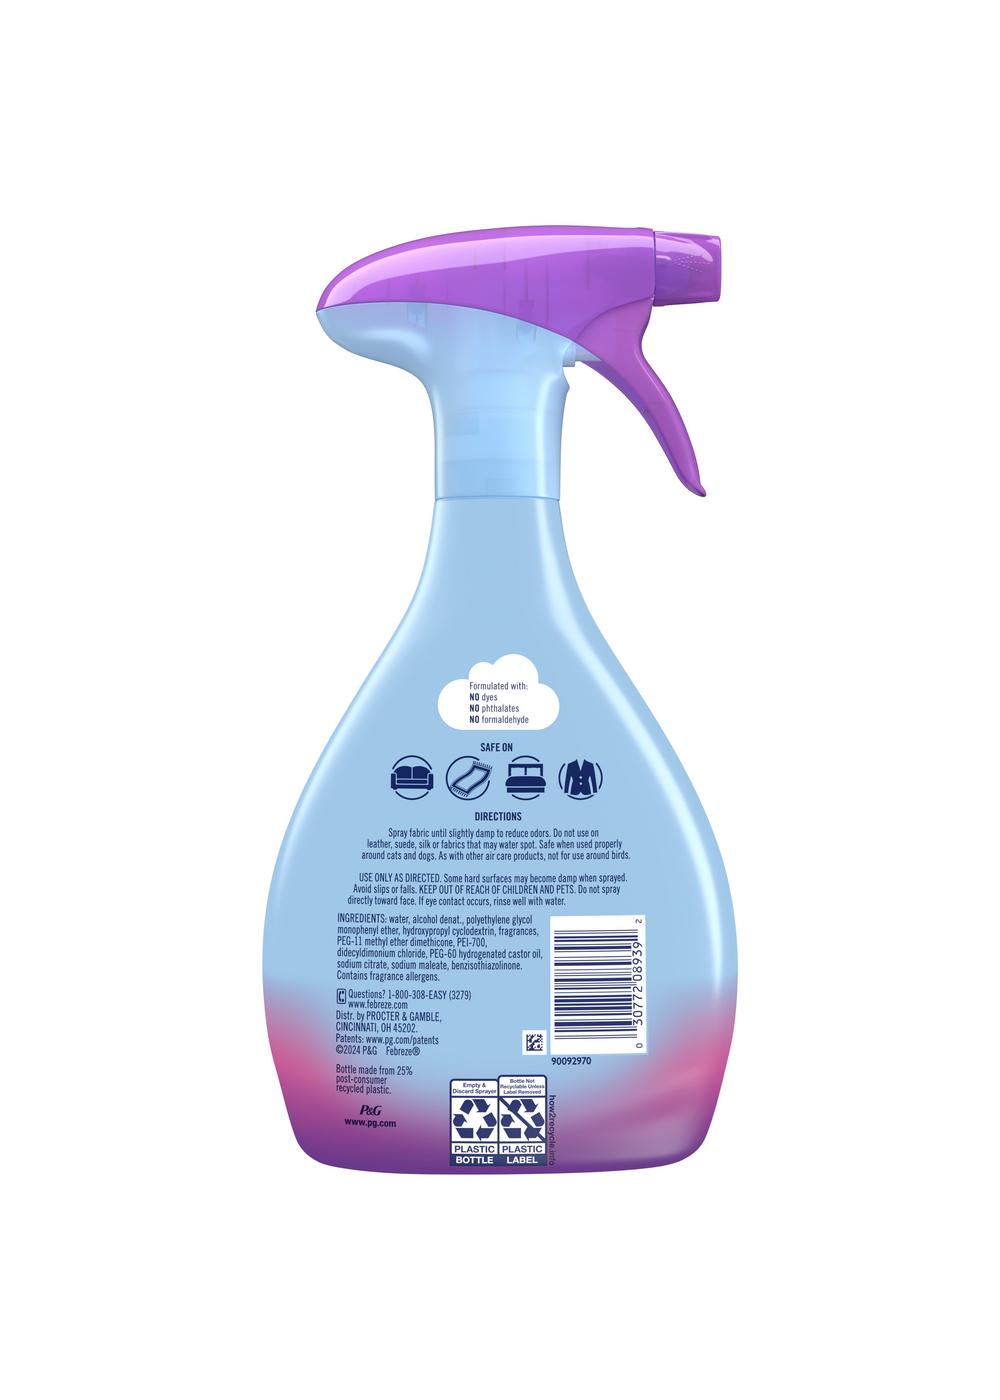 Febreze Fabric Refresher Spray - Moonlight Breeze with Gain Scent; image 4 of 5